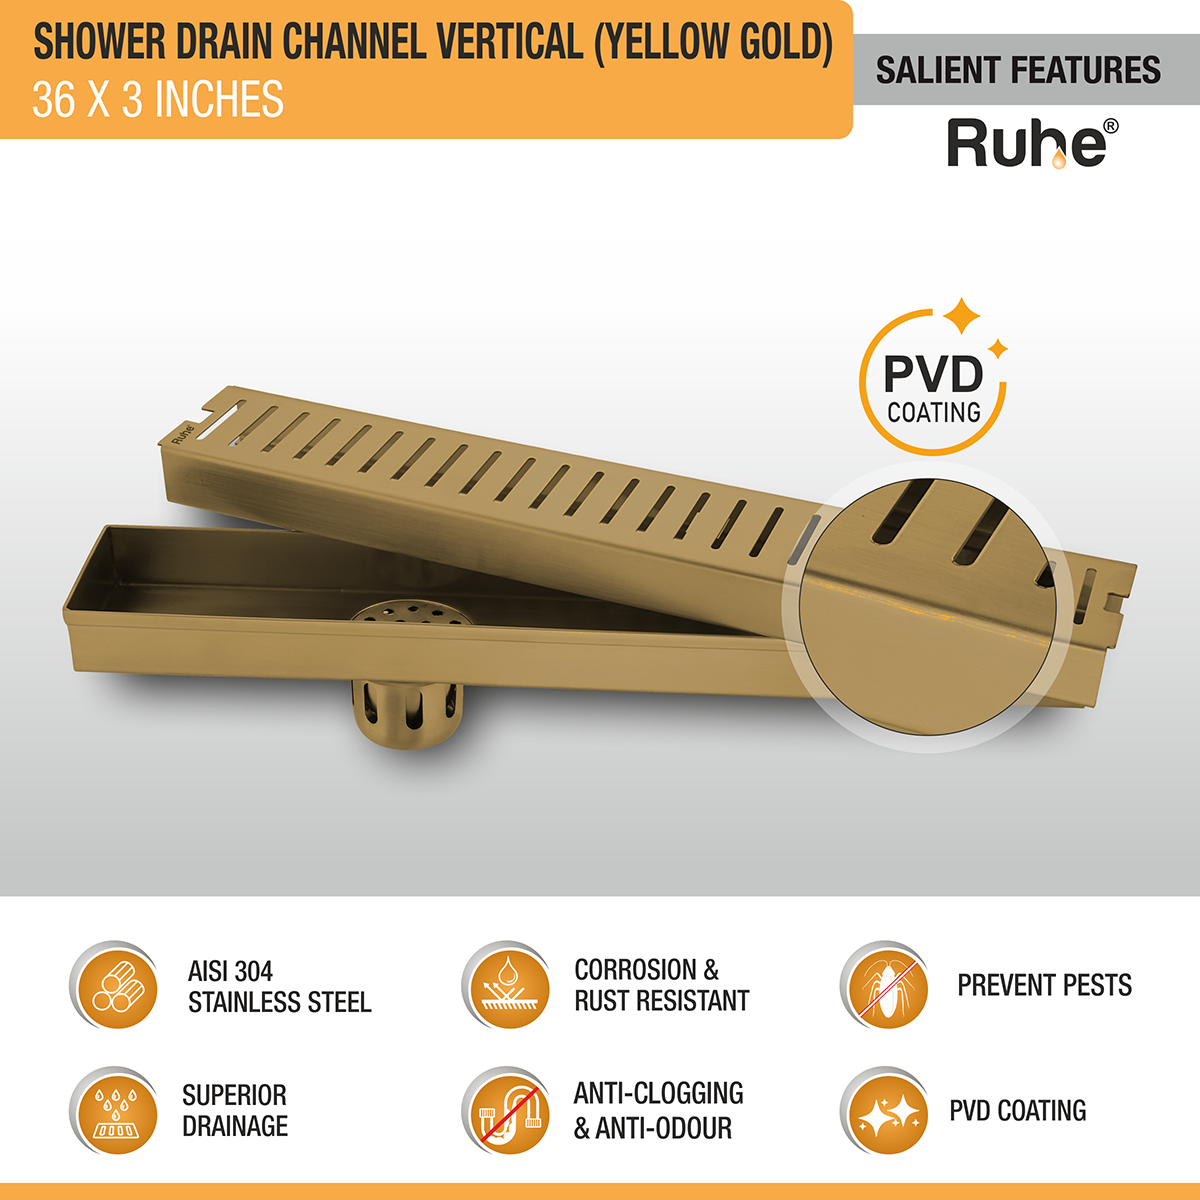 Vertical Shower Drain Channel (36 x 3 Inches) YELLOW GOLD features